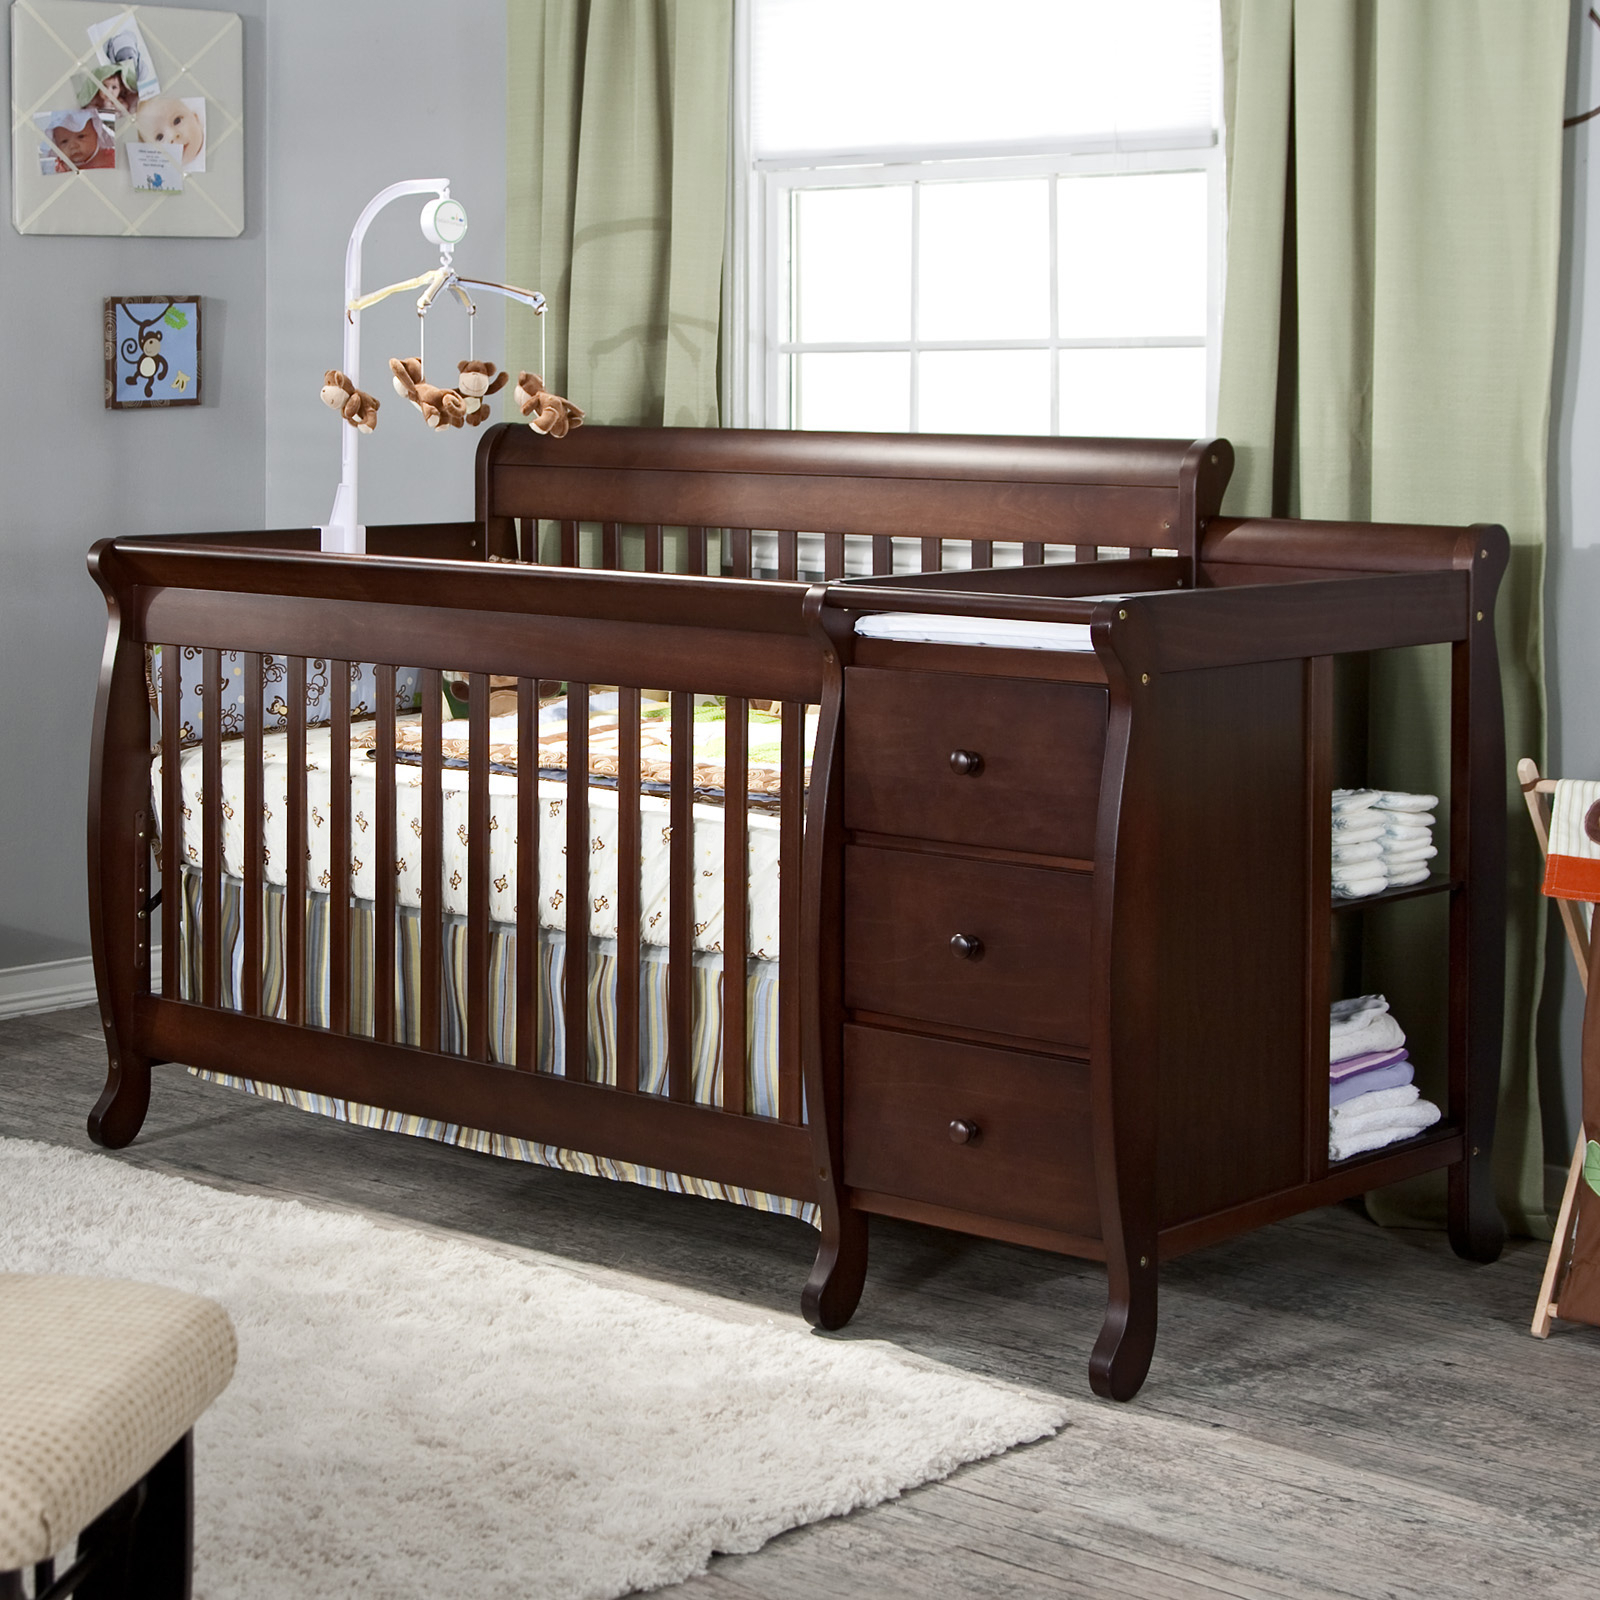 convertible crib with changer